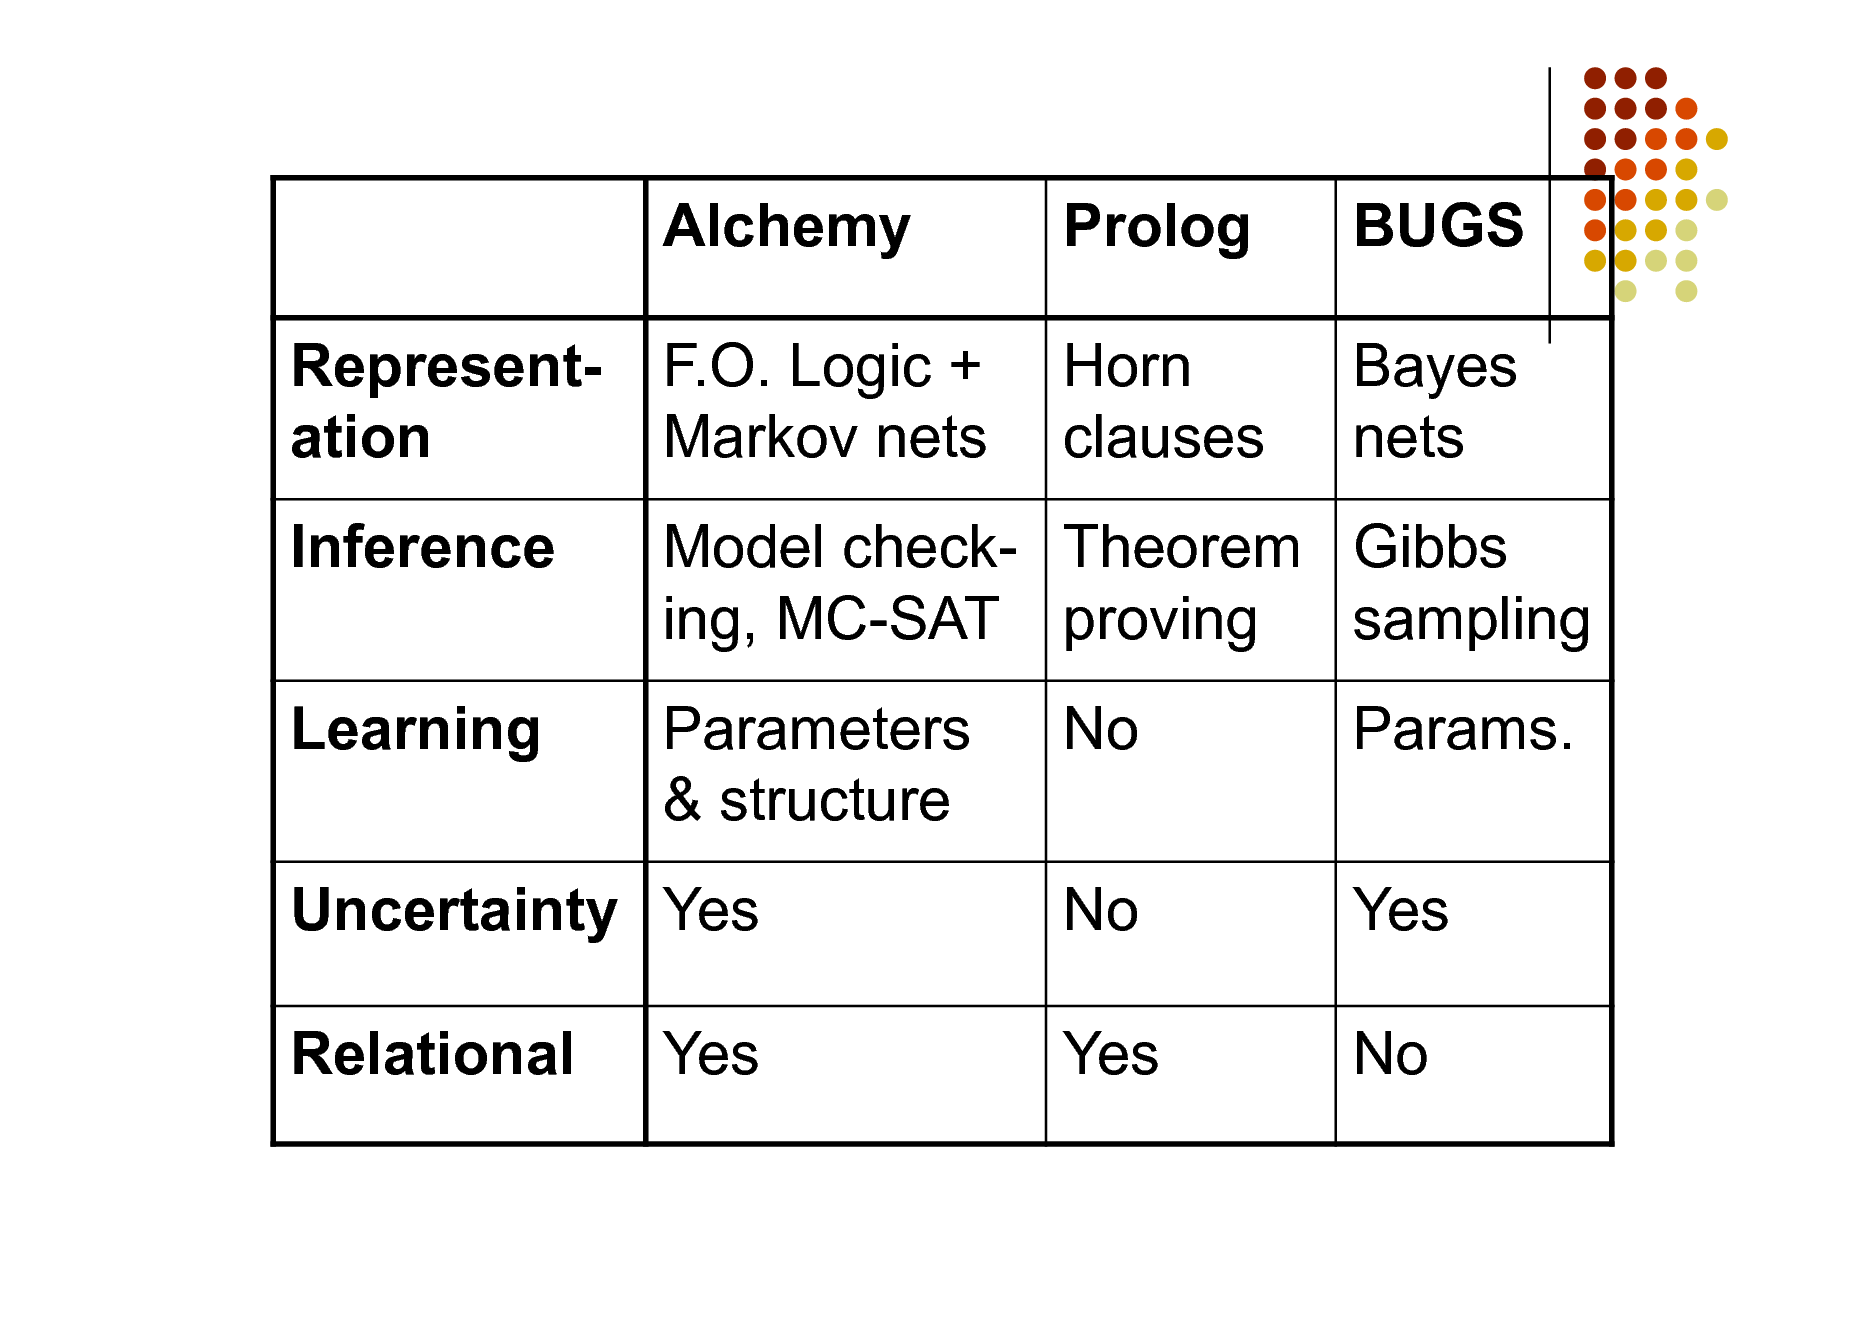 Slide: Alchemy Representation Inference Learning F.O. Logic + Markov nets

Prolog Horn clauses

BUGS Bayes nets

Model check- Theorem Gibbs ing, MC-SAT proving sampling Parameters & structure No No Yes Params. Yes No

Uncertainty Yes Relational Yes

